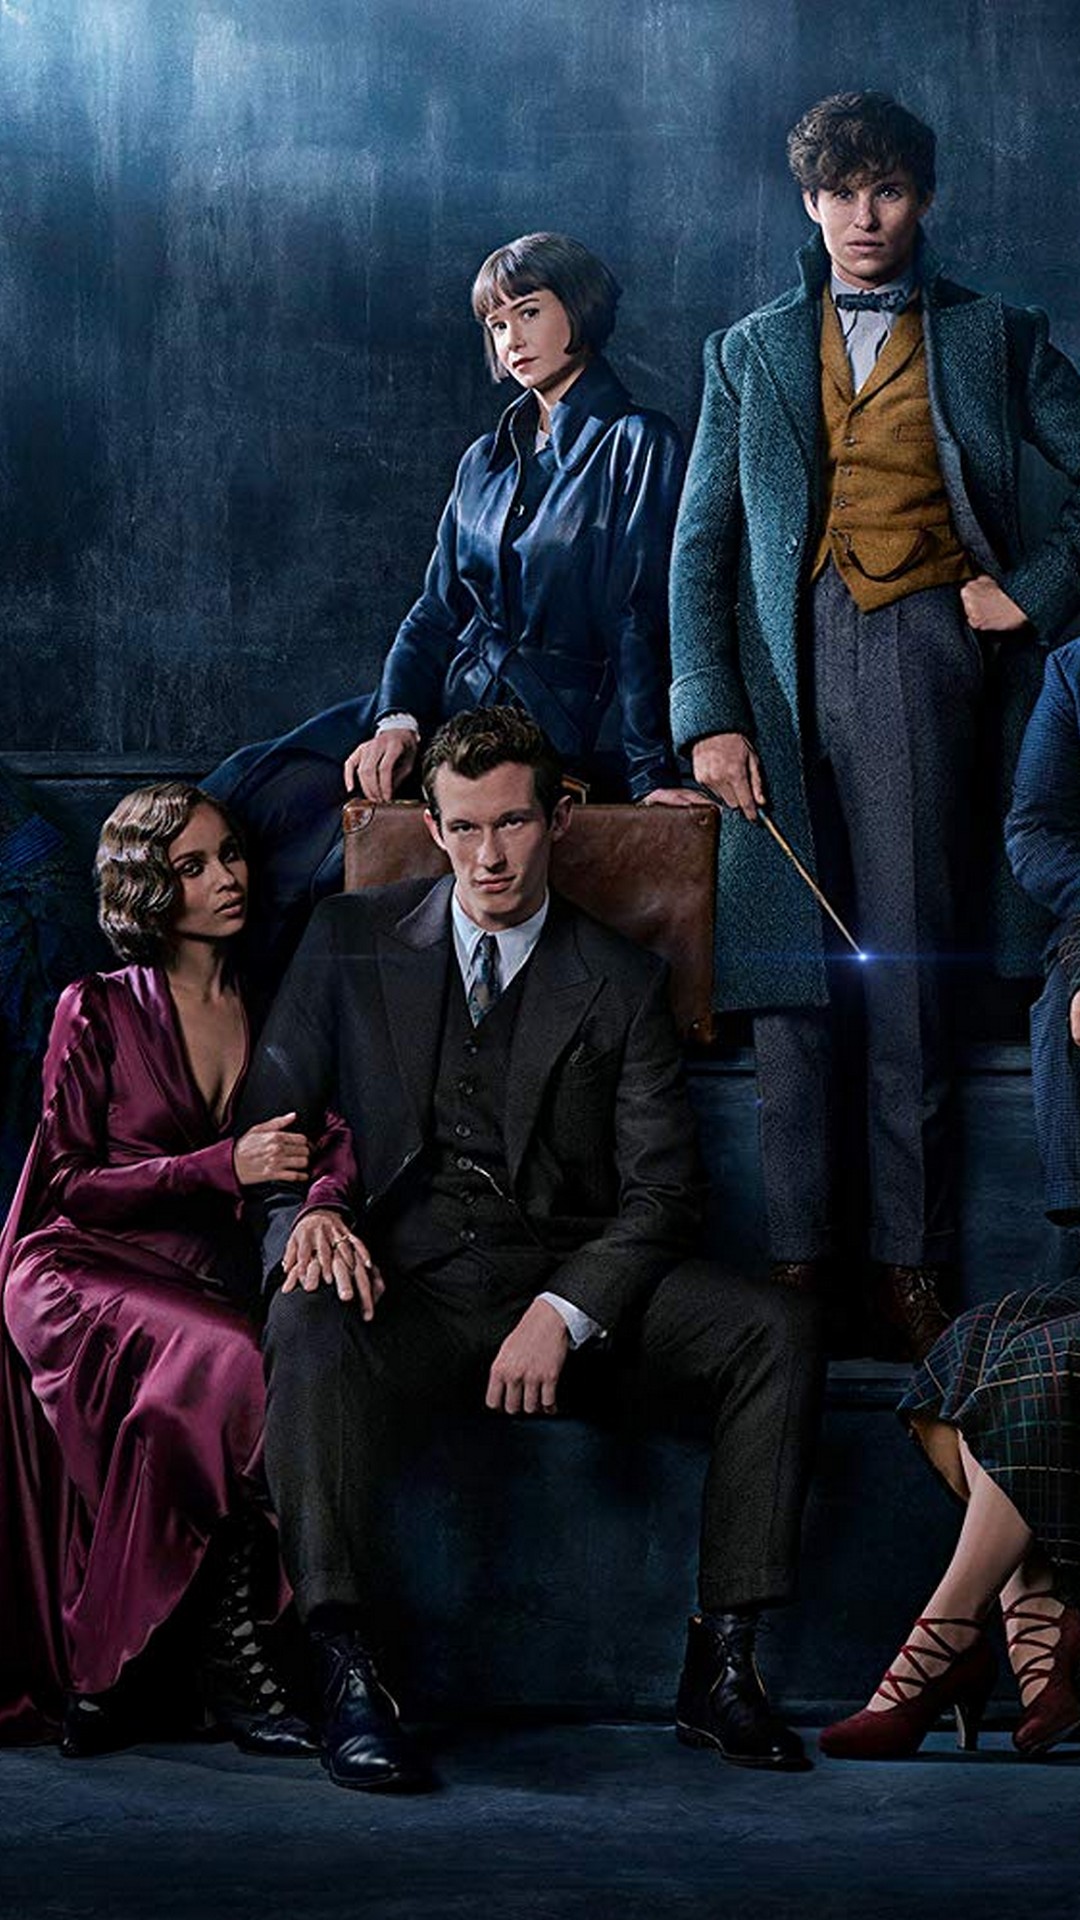 Fantastic Beasts The Crimes of Grindelwald 2018 Movie Poster With Resolution 1080X1920 pixel. You can make this wallpaper for your Mac or Windows Desktop Background, iPhone, Android or Tablet and another Smartphone device for free